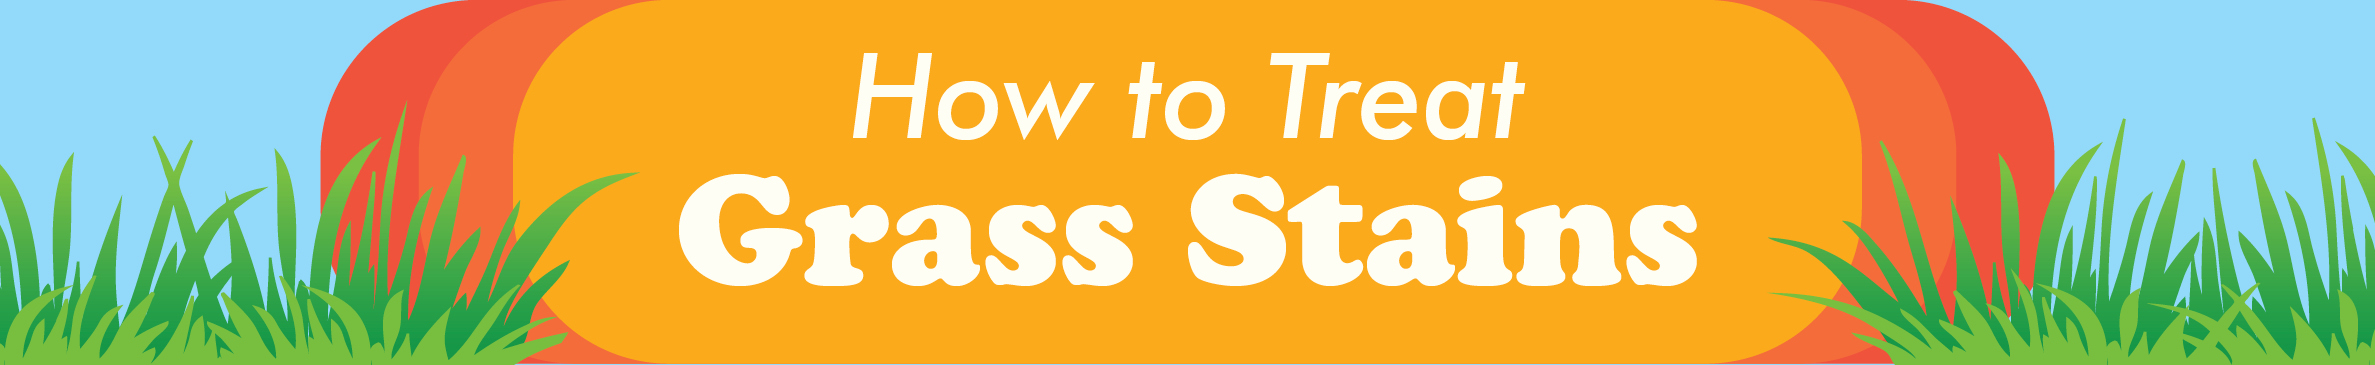 Illustrated headline "How to Treat Grass Stains" on grass with orange background.